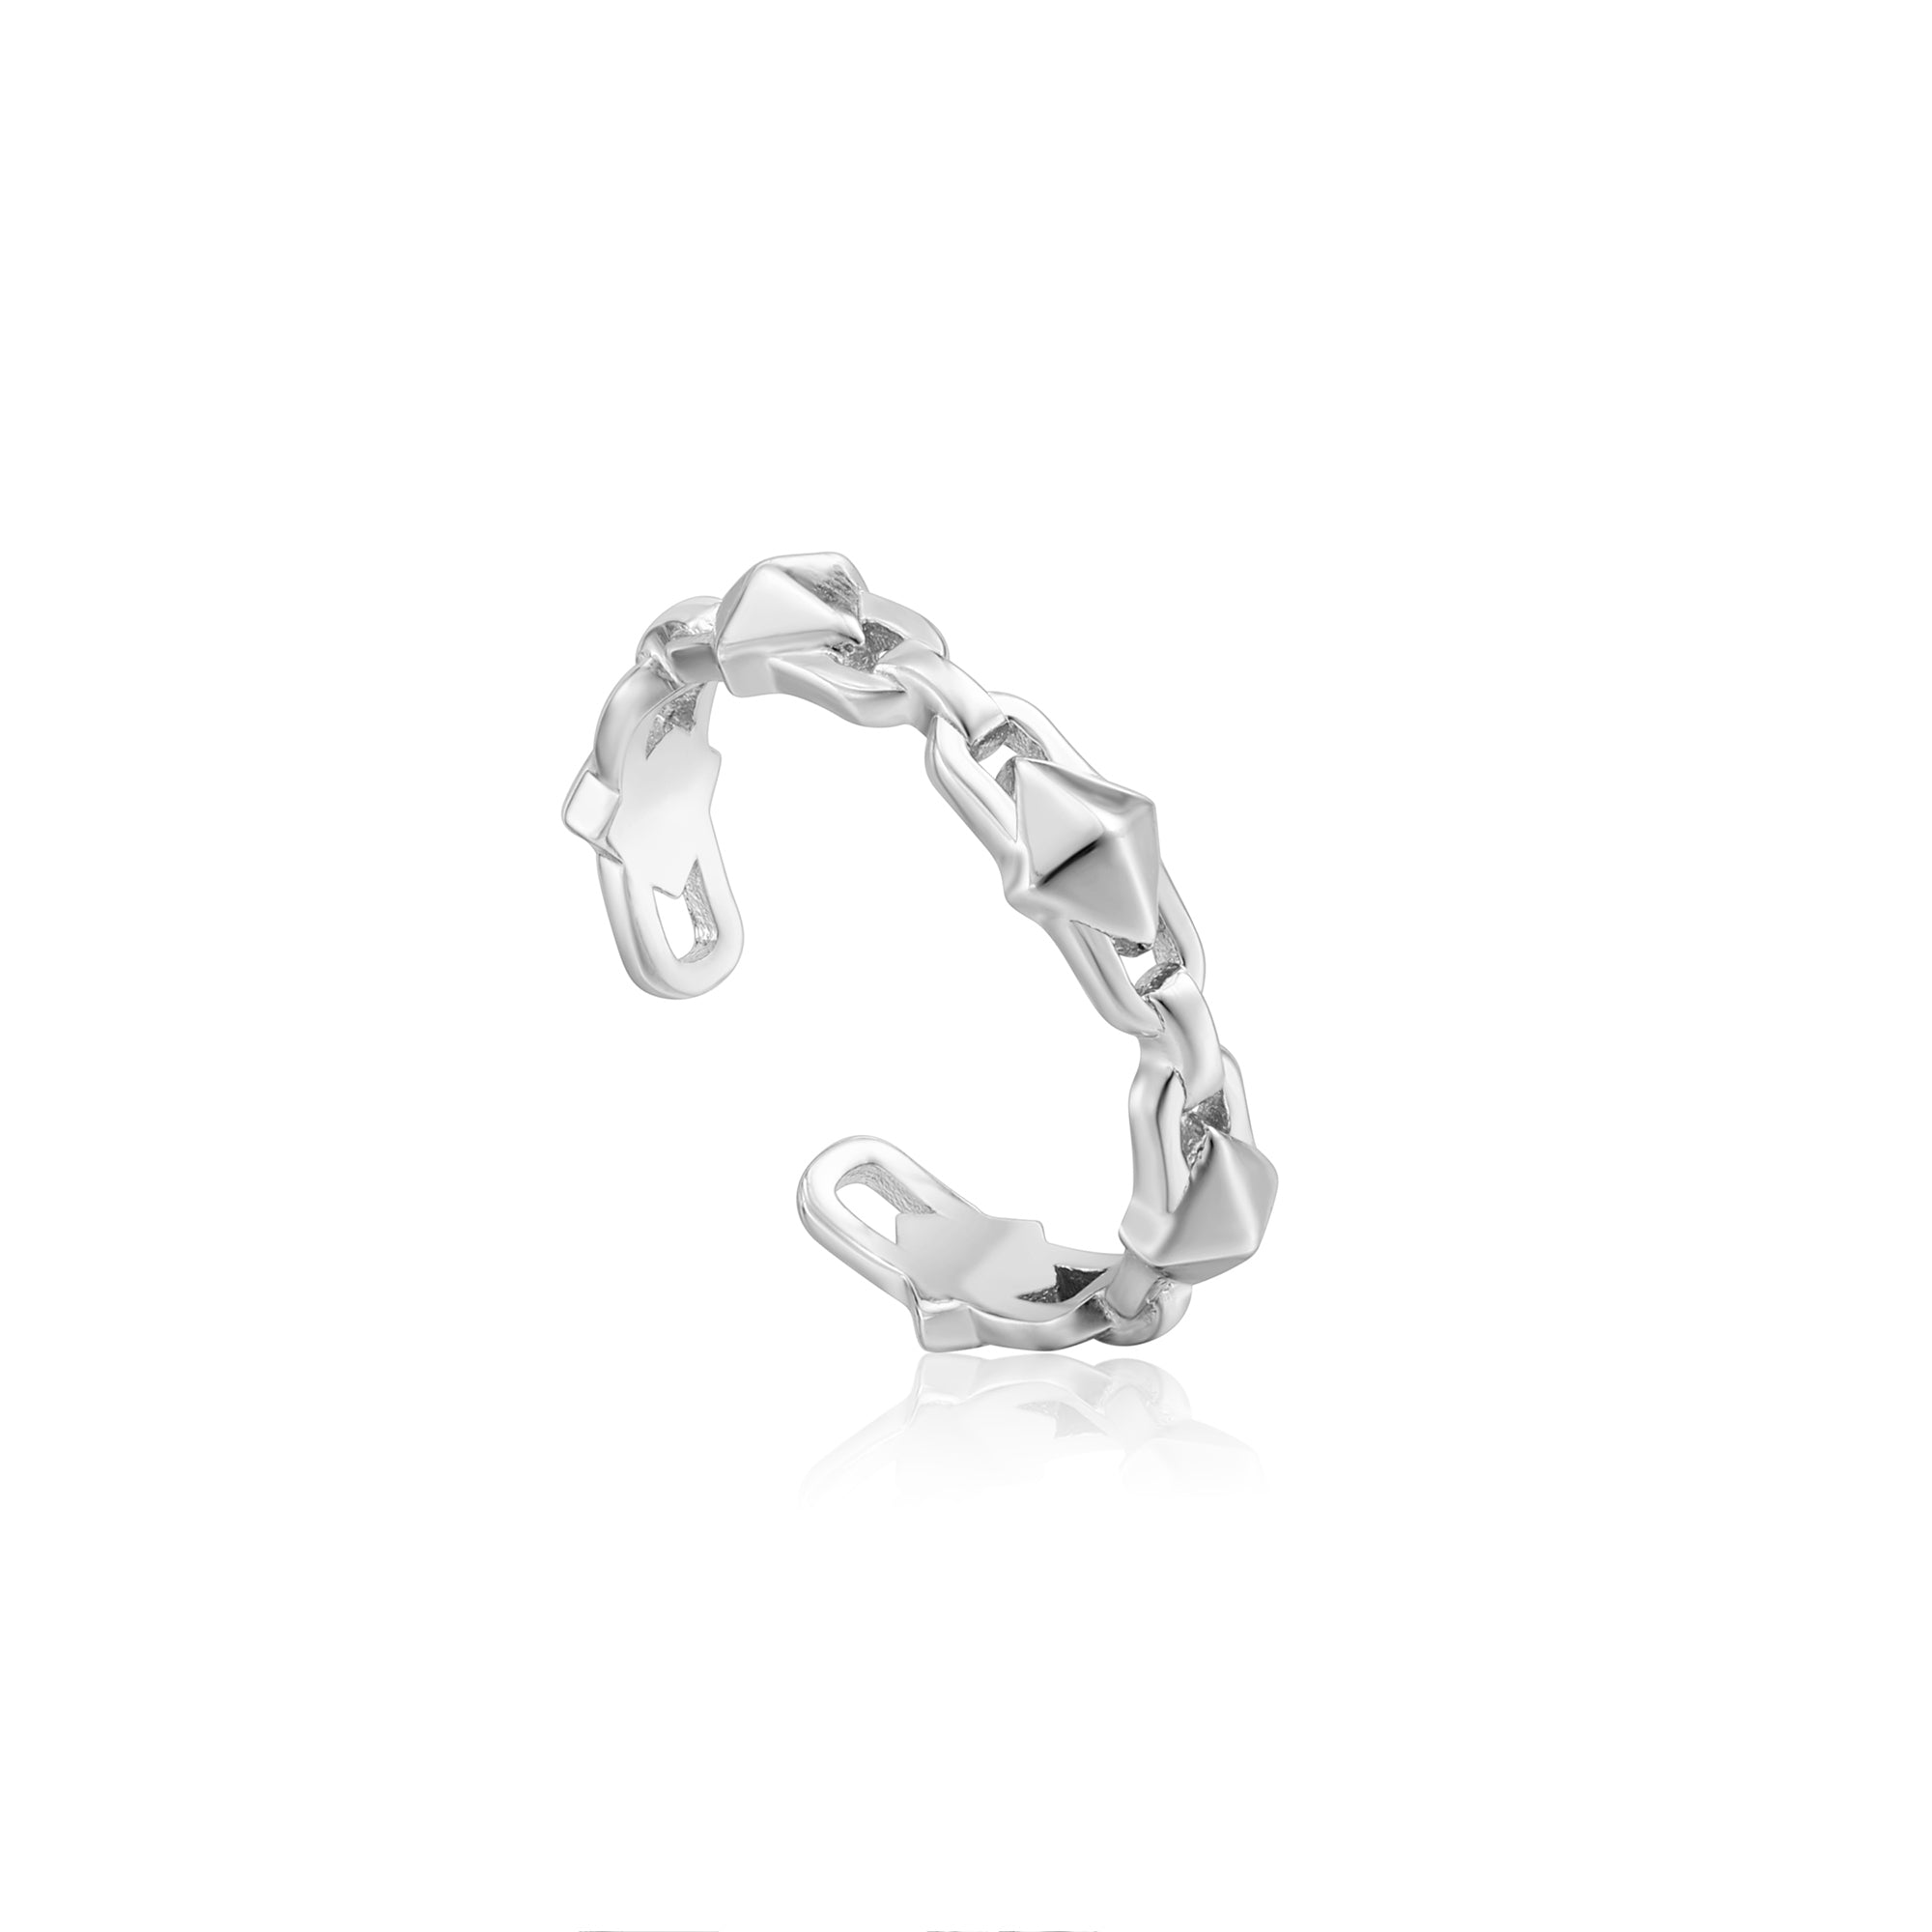 Ania Haie Spike Adjustabe Ring | More Than Just A Gift